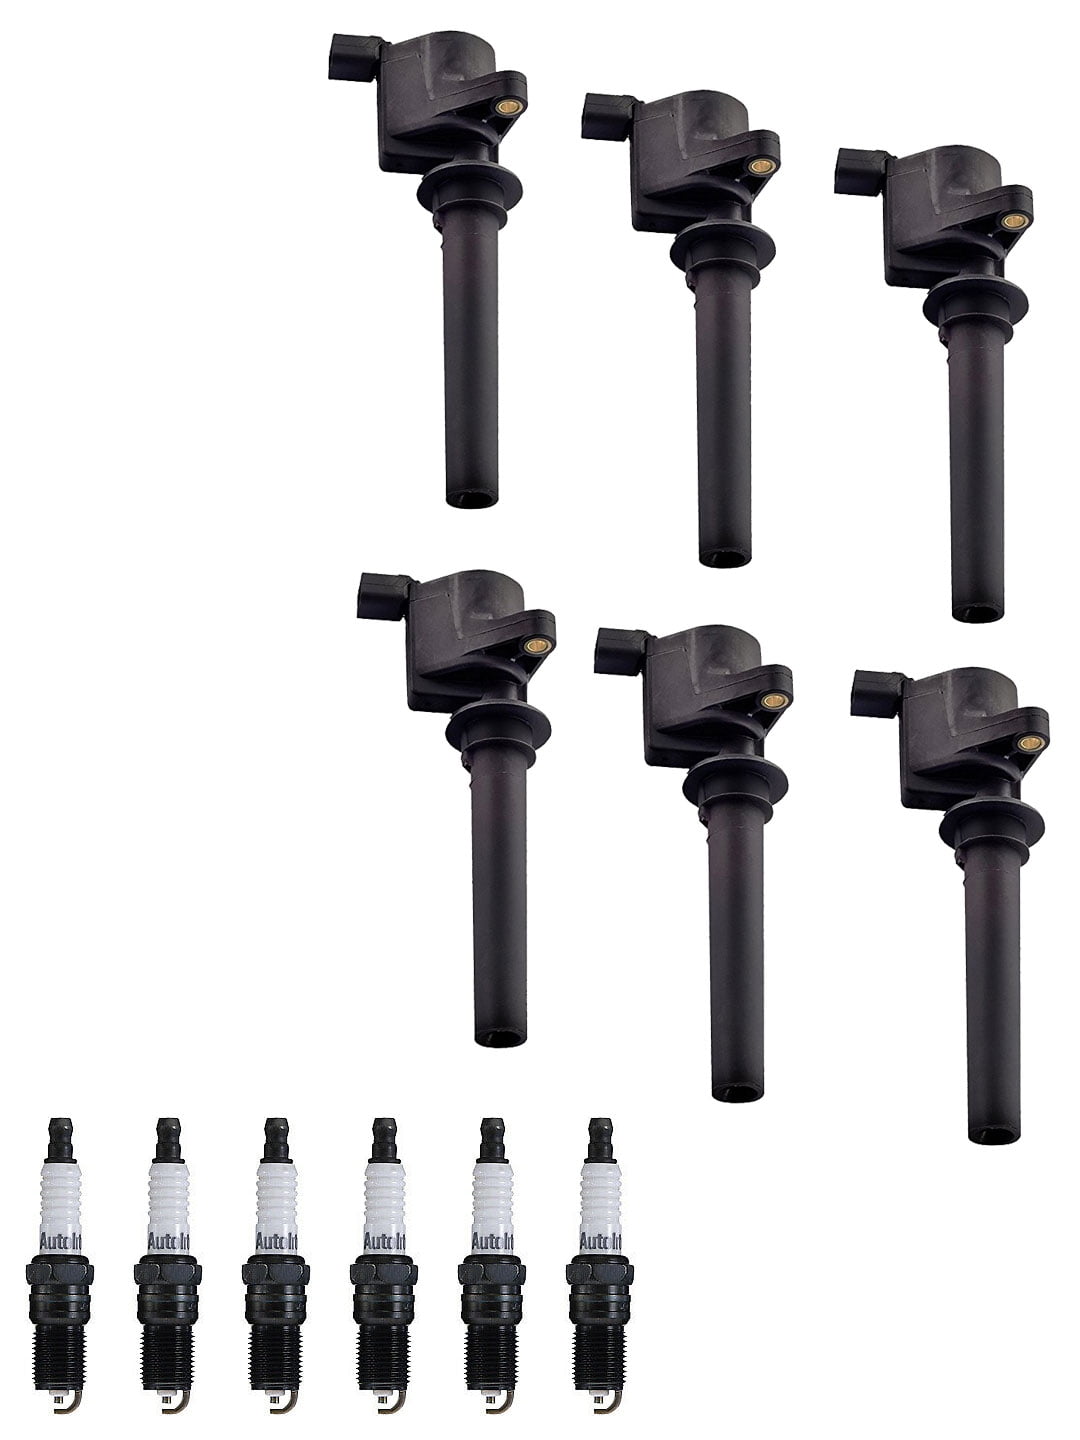 New Pack of 6 Ignition Coils for 3.0L V6 Ford Escape Mazda Mercury FD502 DG500 